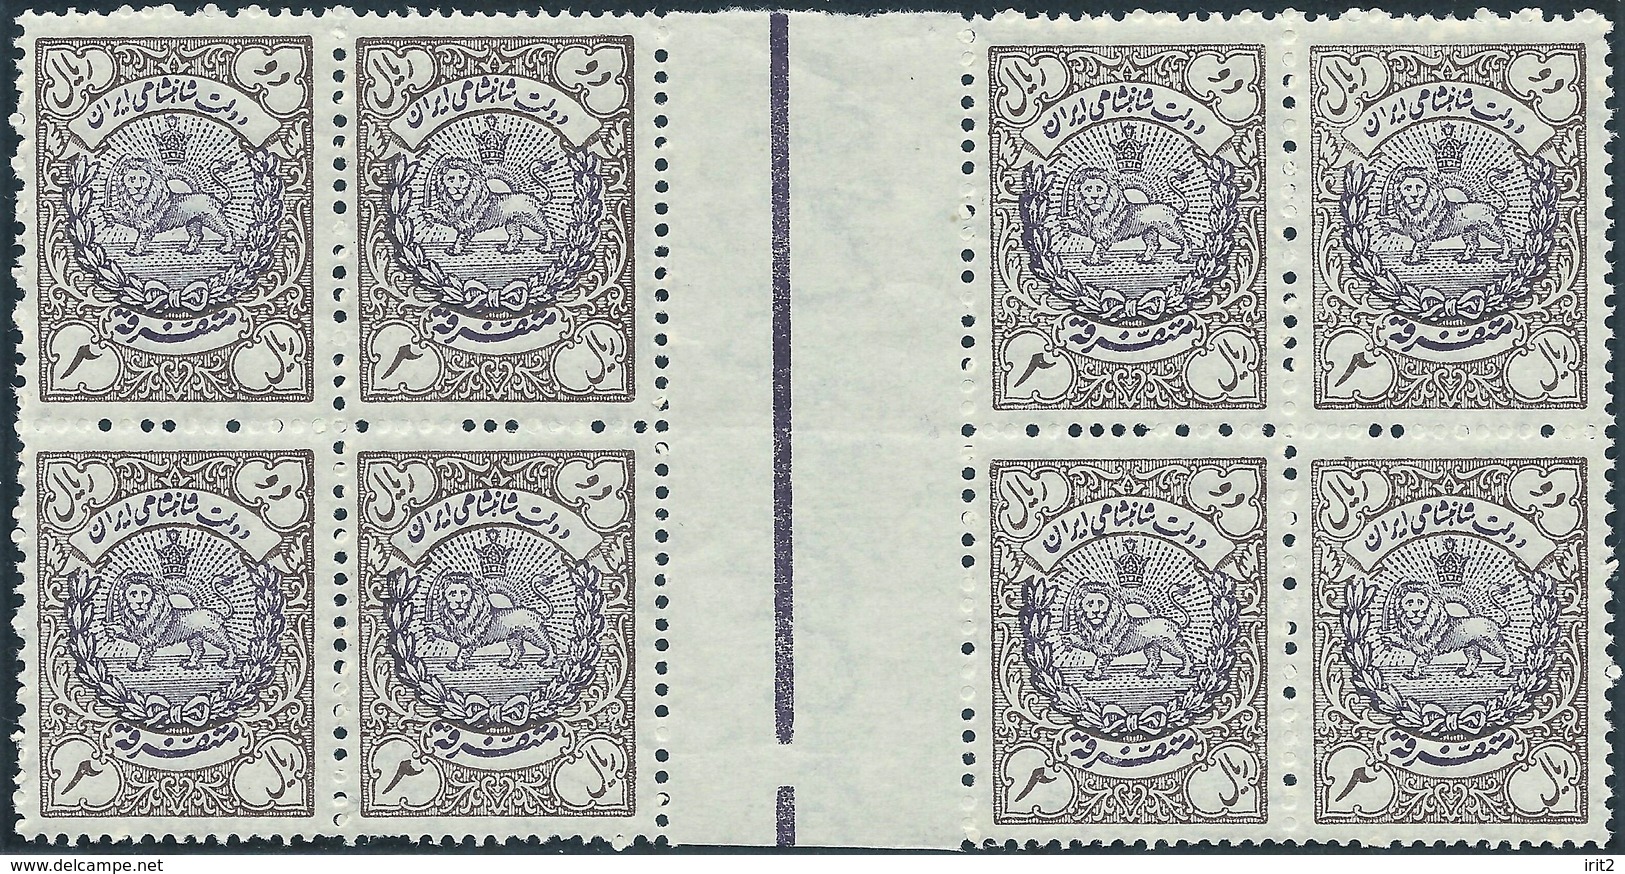 PERSIA PERSE IRAN PERSIEN PERSIAN,Imperial Government Of Iran, Pahlavi, Revenue Stamps 2 Rial In Two Whole Blocks, MNH - Irán